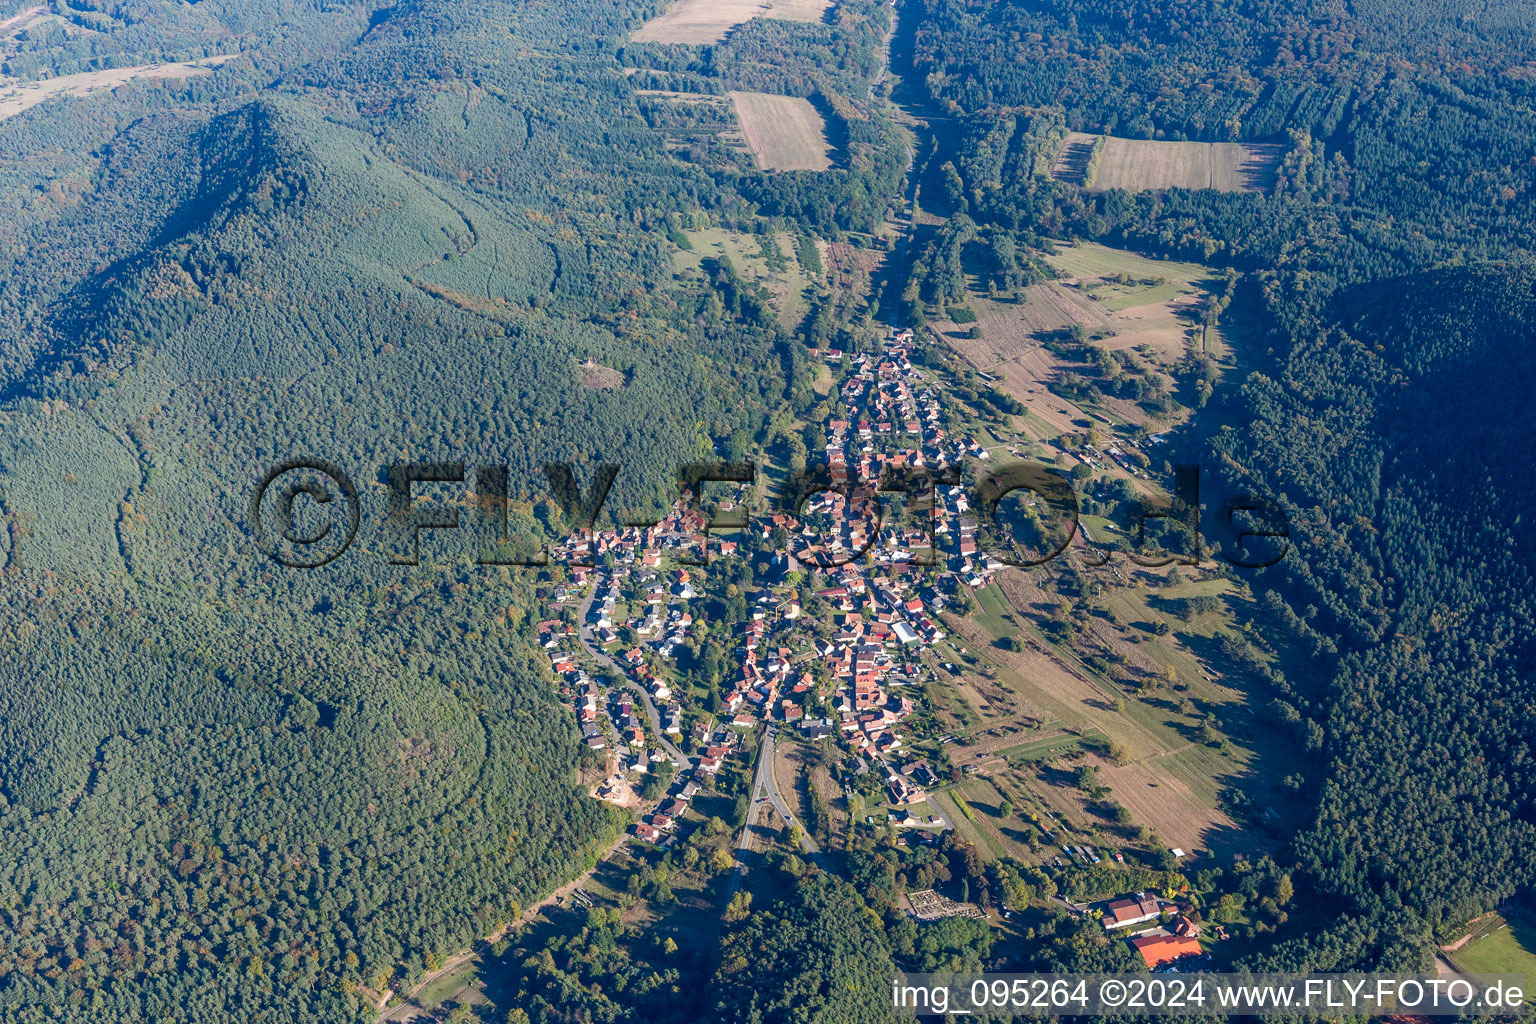 Aerial view of Village - view on the edge of agricultural fields and farmland in Birkenhoerdt in the state Rhineland-Palatinate, Germany